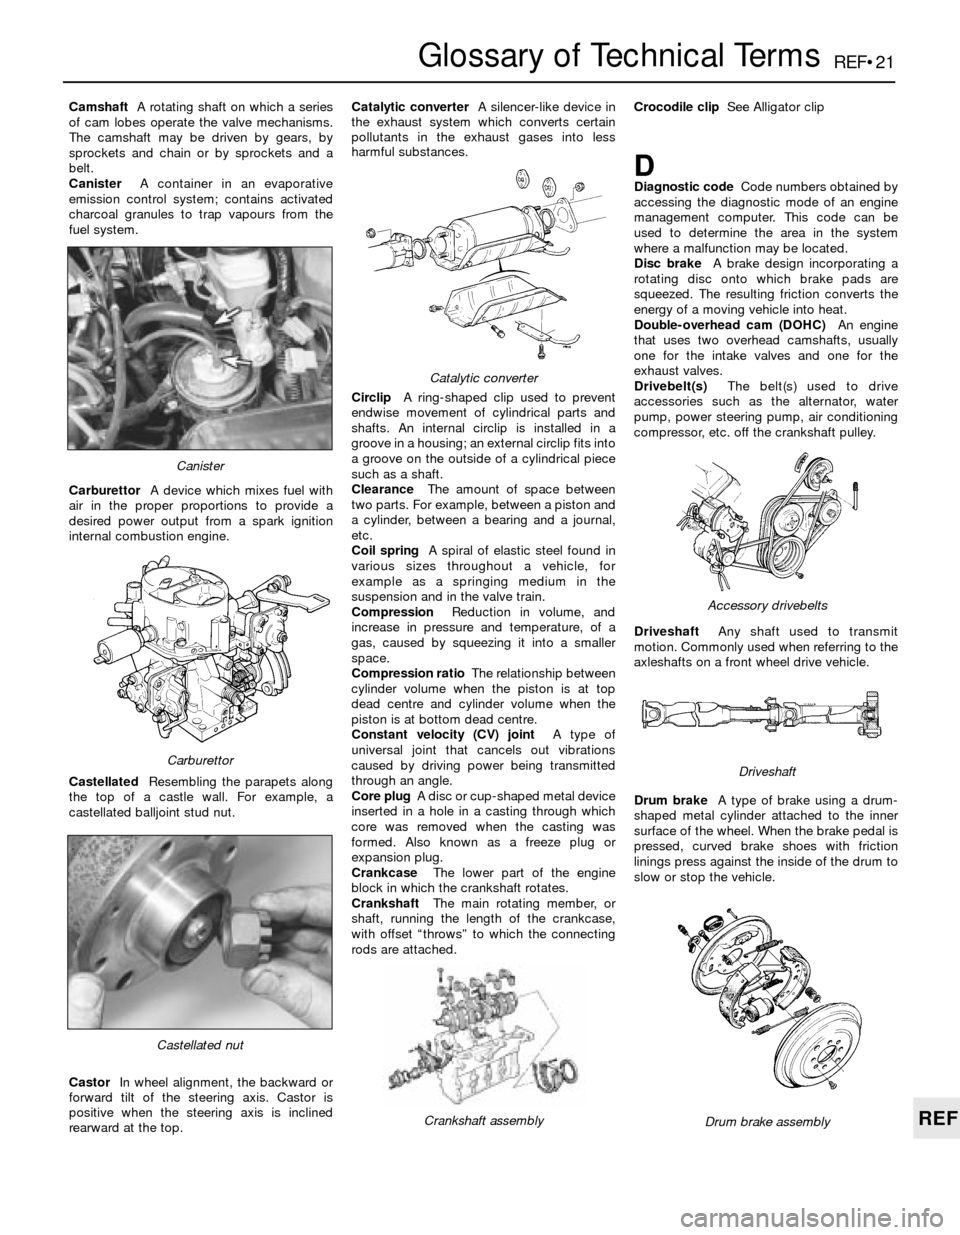 BMW 3 SERIES 1986 E30 Workshop Manual REF•21
REF
Glossary of Technical Terms
CamshaftA rotating shaft on which a series
of cam lobes operate the valve mechanisms.
The camshaft may be driven by gears, by
sprockets and chain or by sprocke